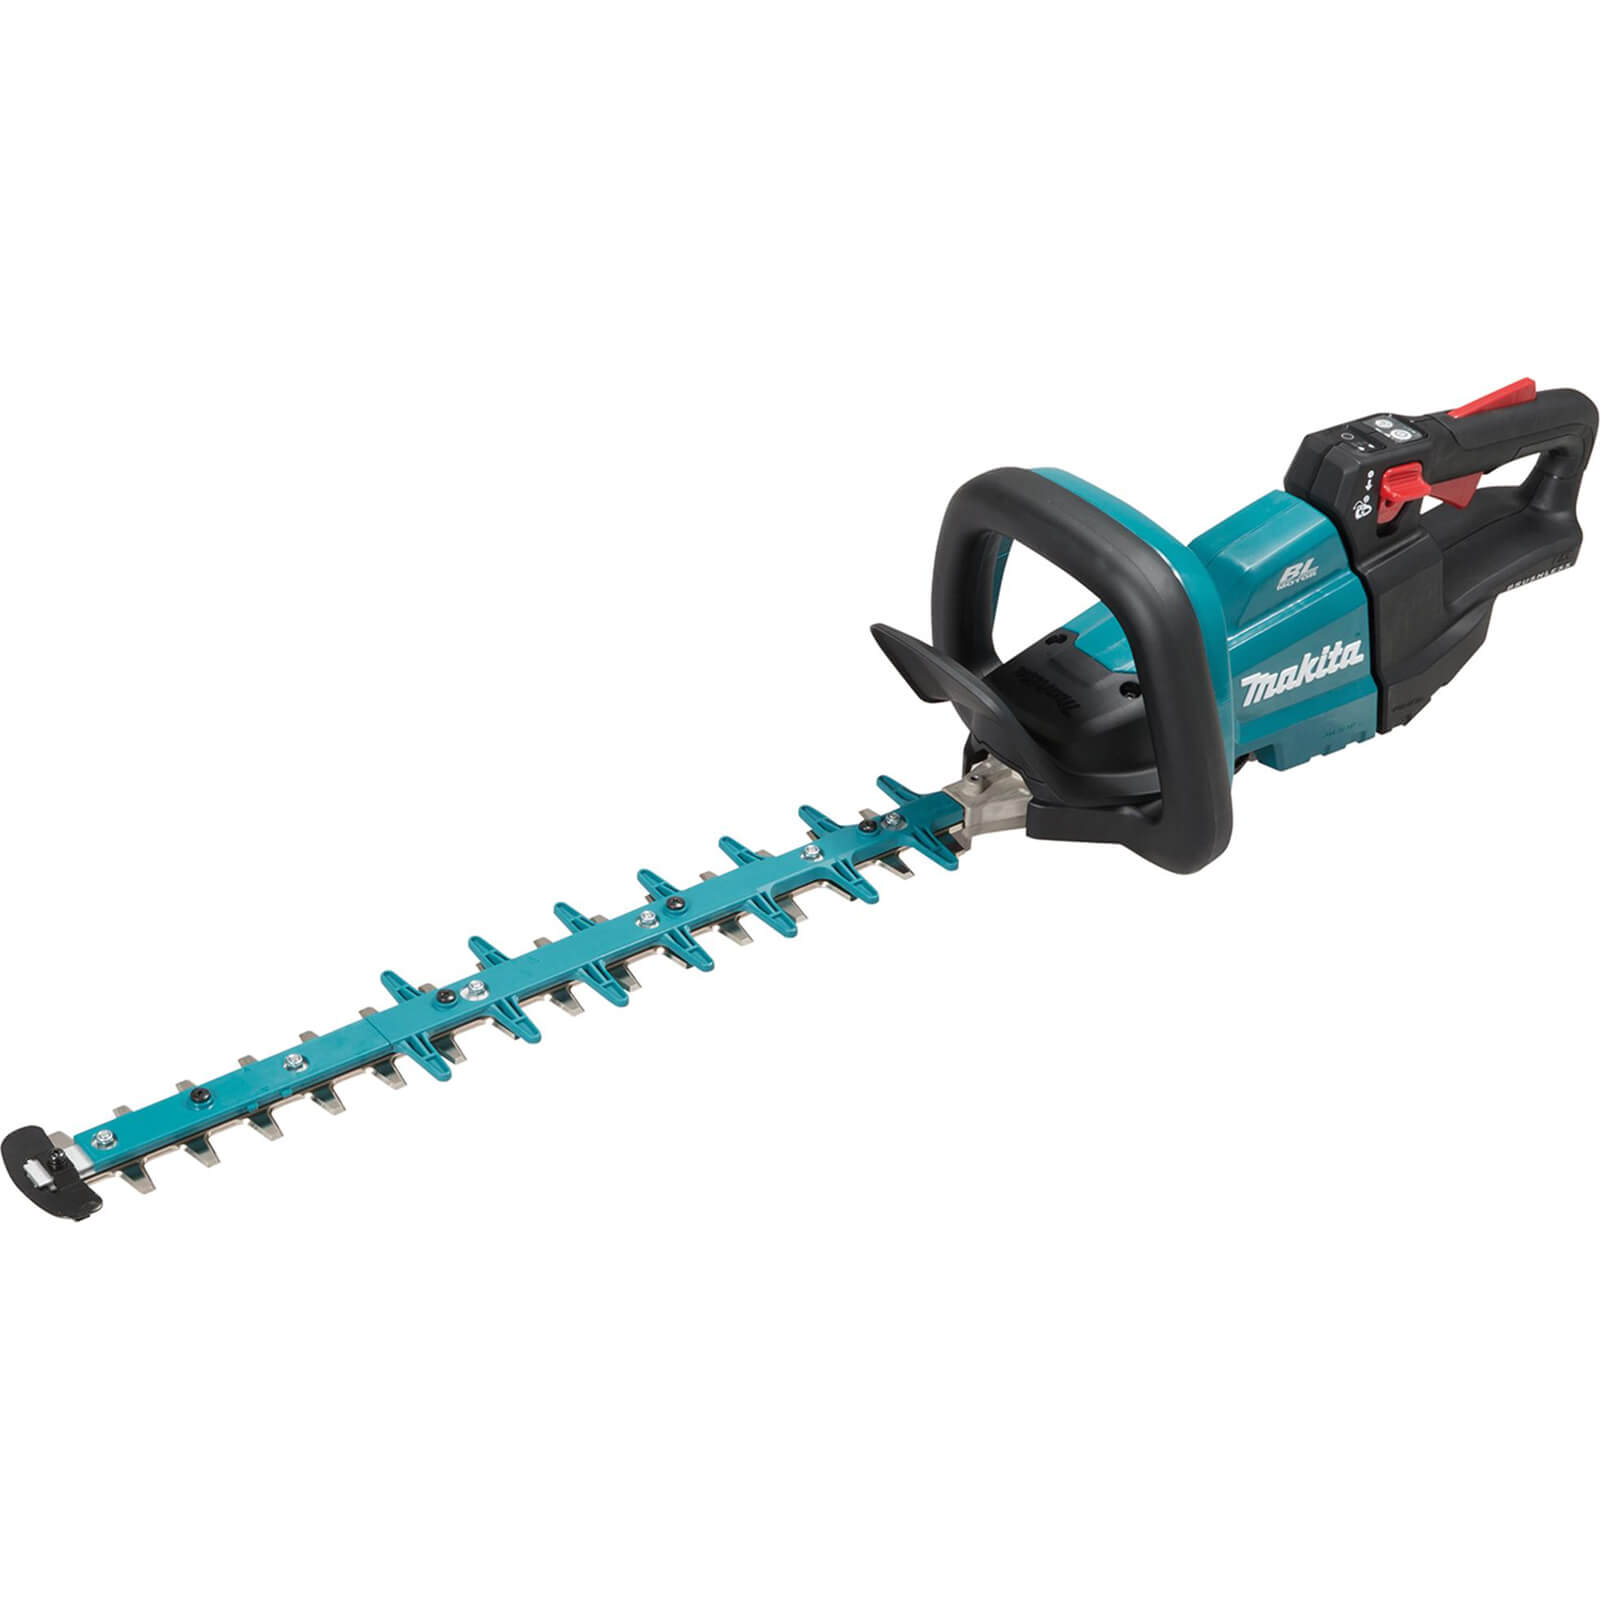 Makita DUH502 18v LXT Cordless Brushless Hedge Trimmer 500mm No Batteries No Charger